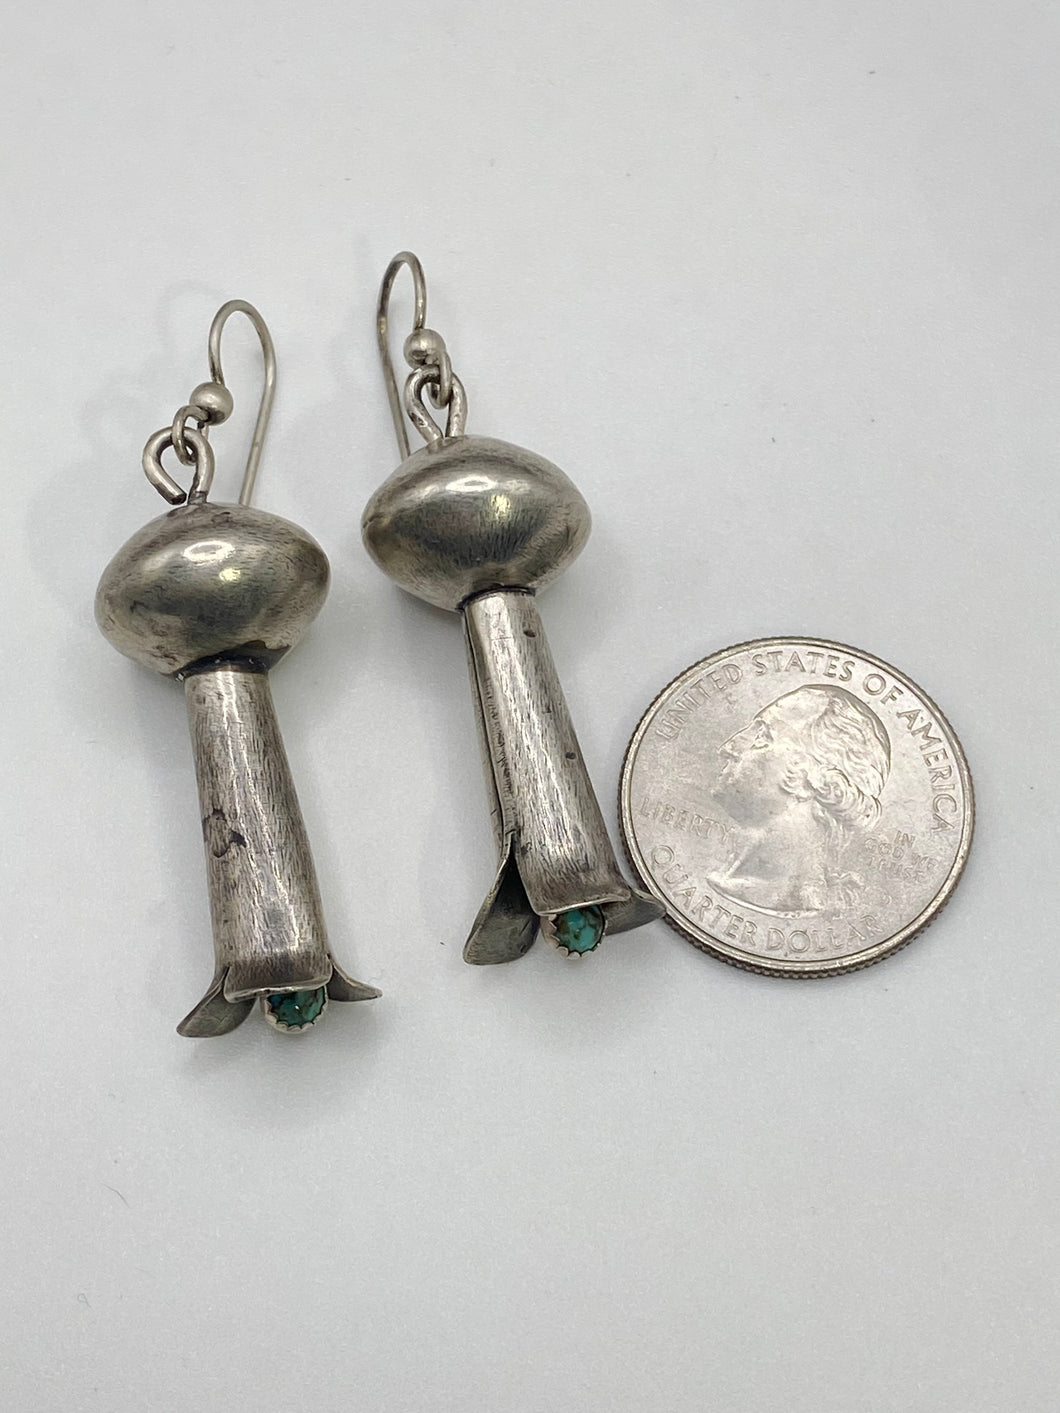 Squash Blossom Earrings in Sterling Silver